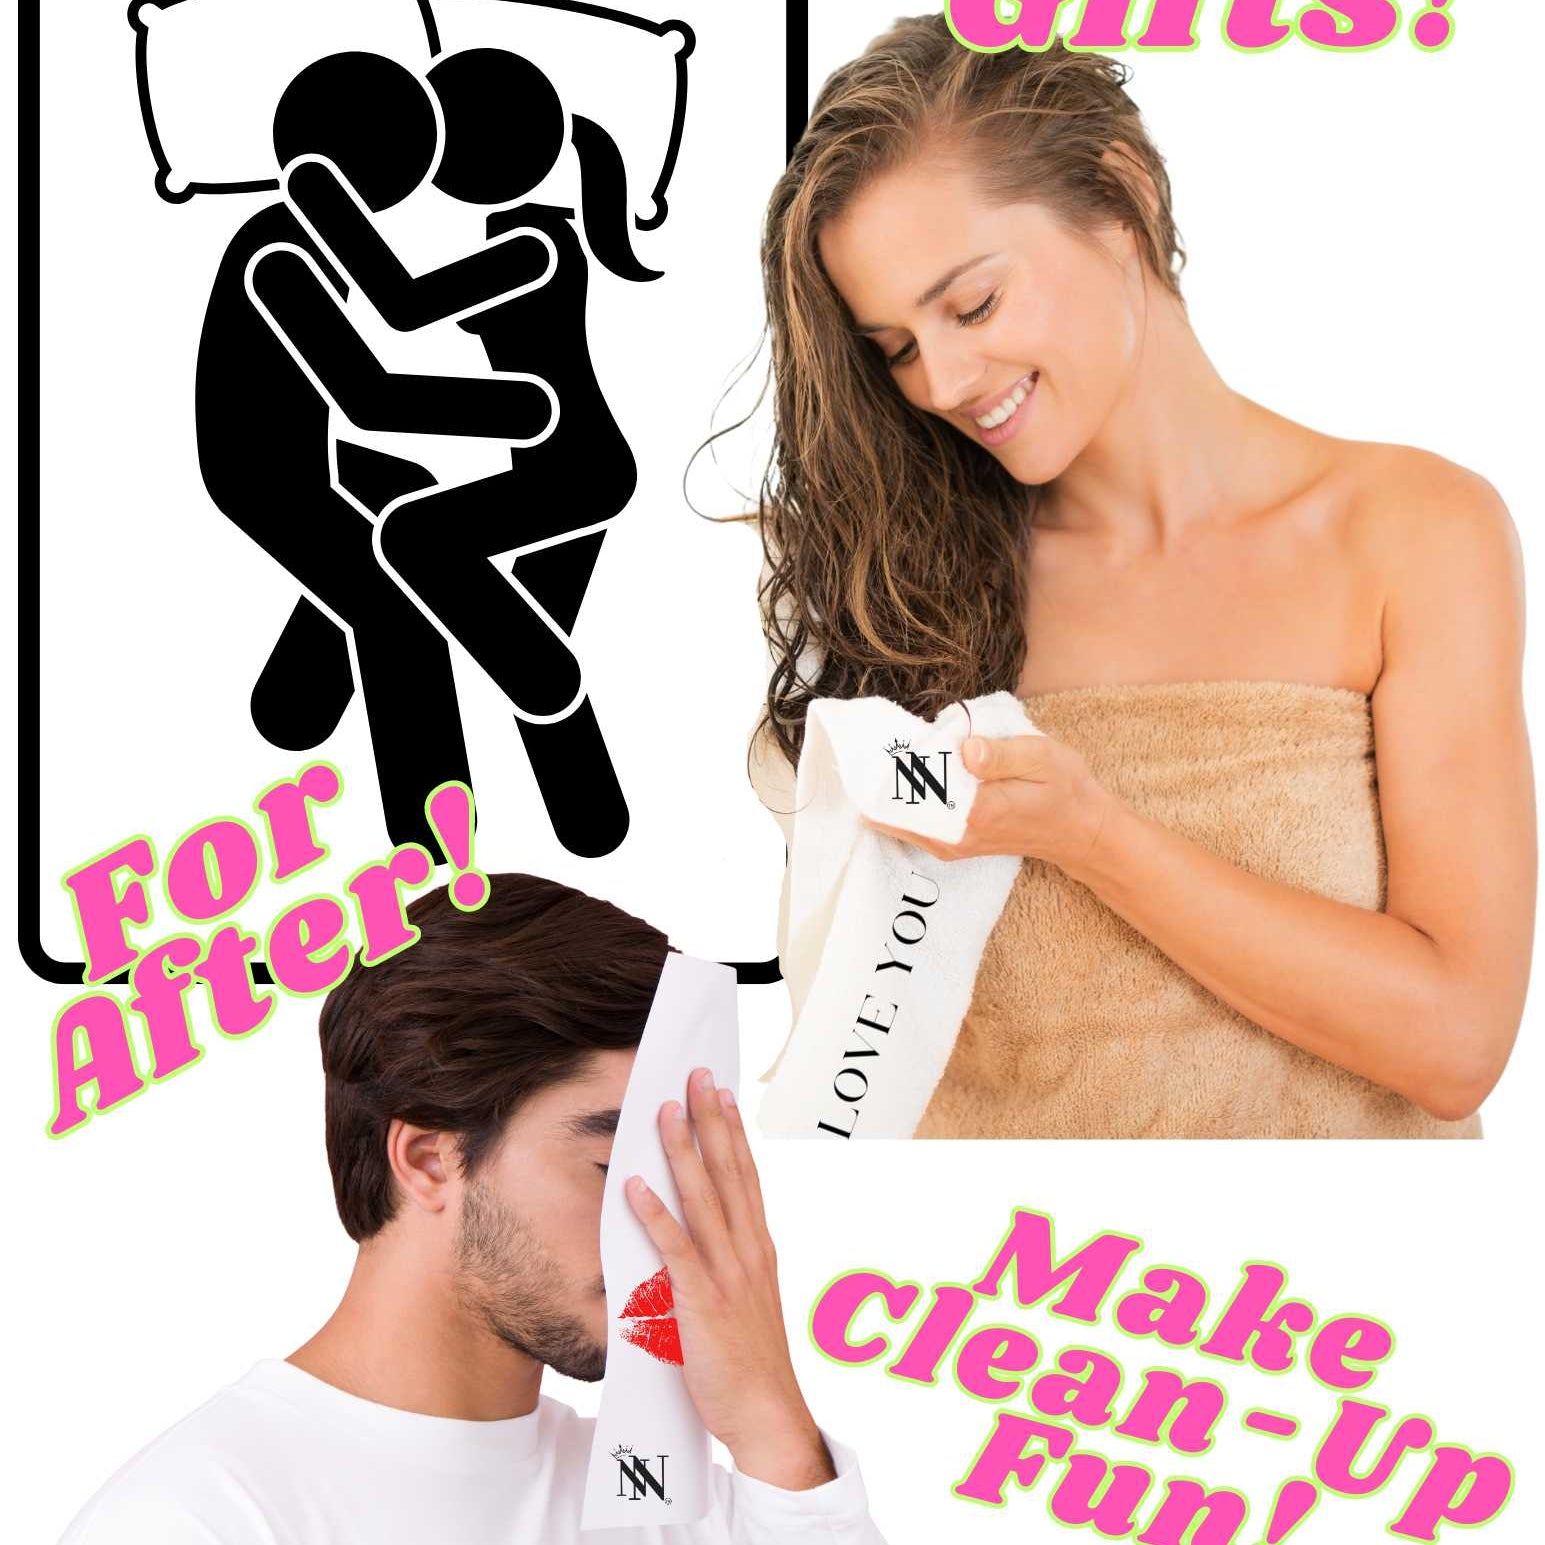 Lils' Love Wins | Gifts for Boyfriend, Funny Towel Romantic Gift for Wedding Couple Fiance First Year Anniversary Valentines, Party Gag Gifts, Joke Humor Cloth for Husband Men BF NECTAR NAPKINS